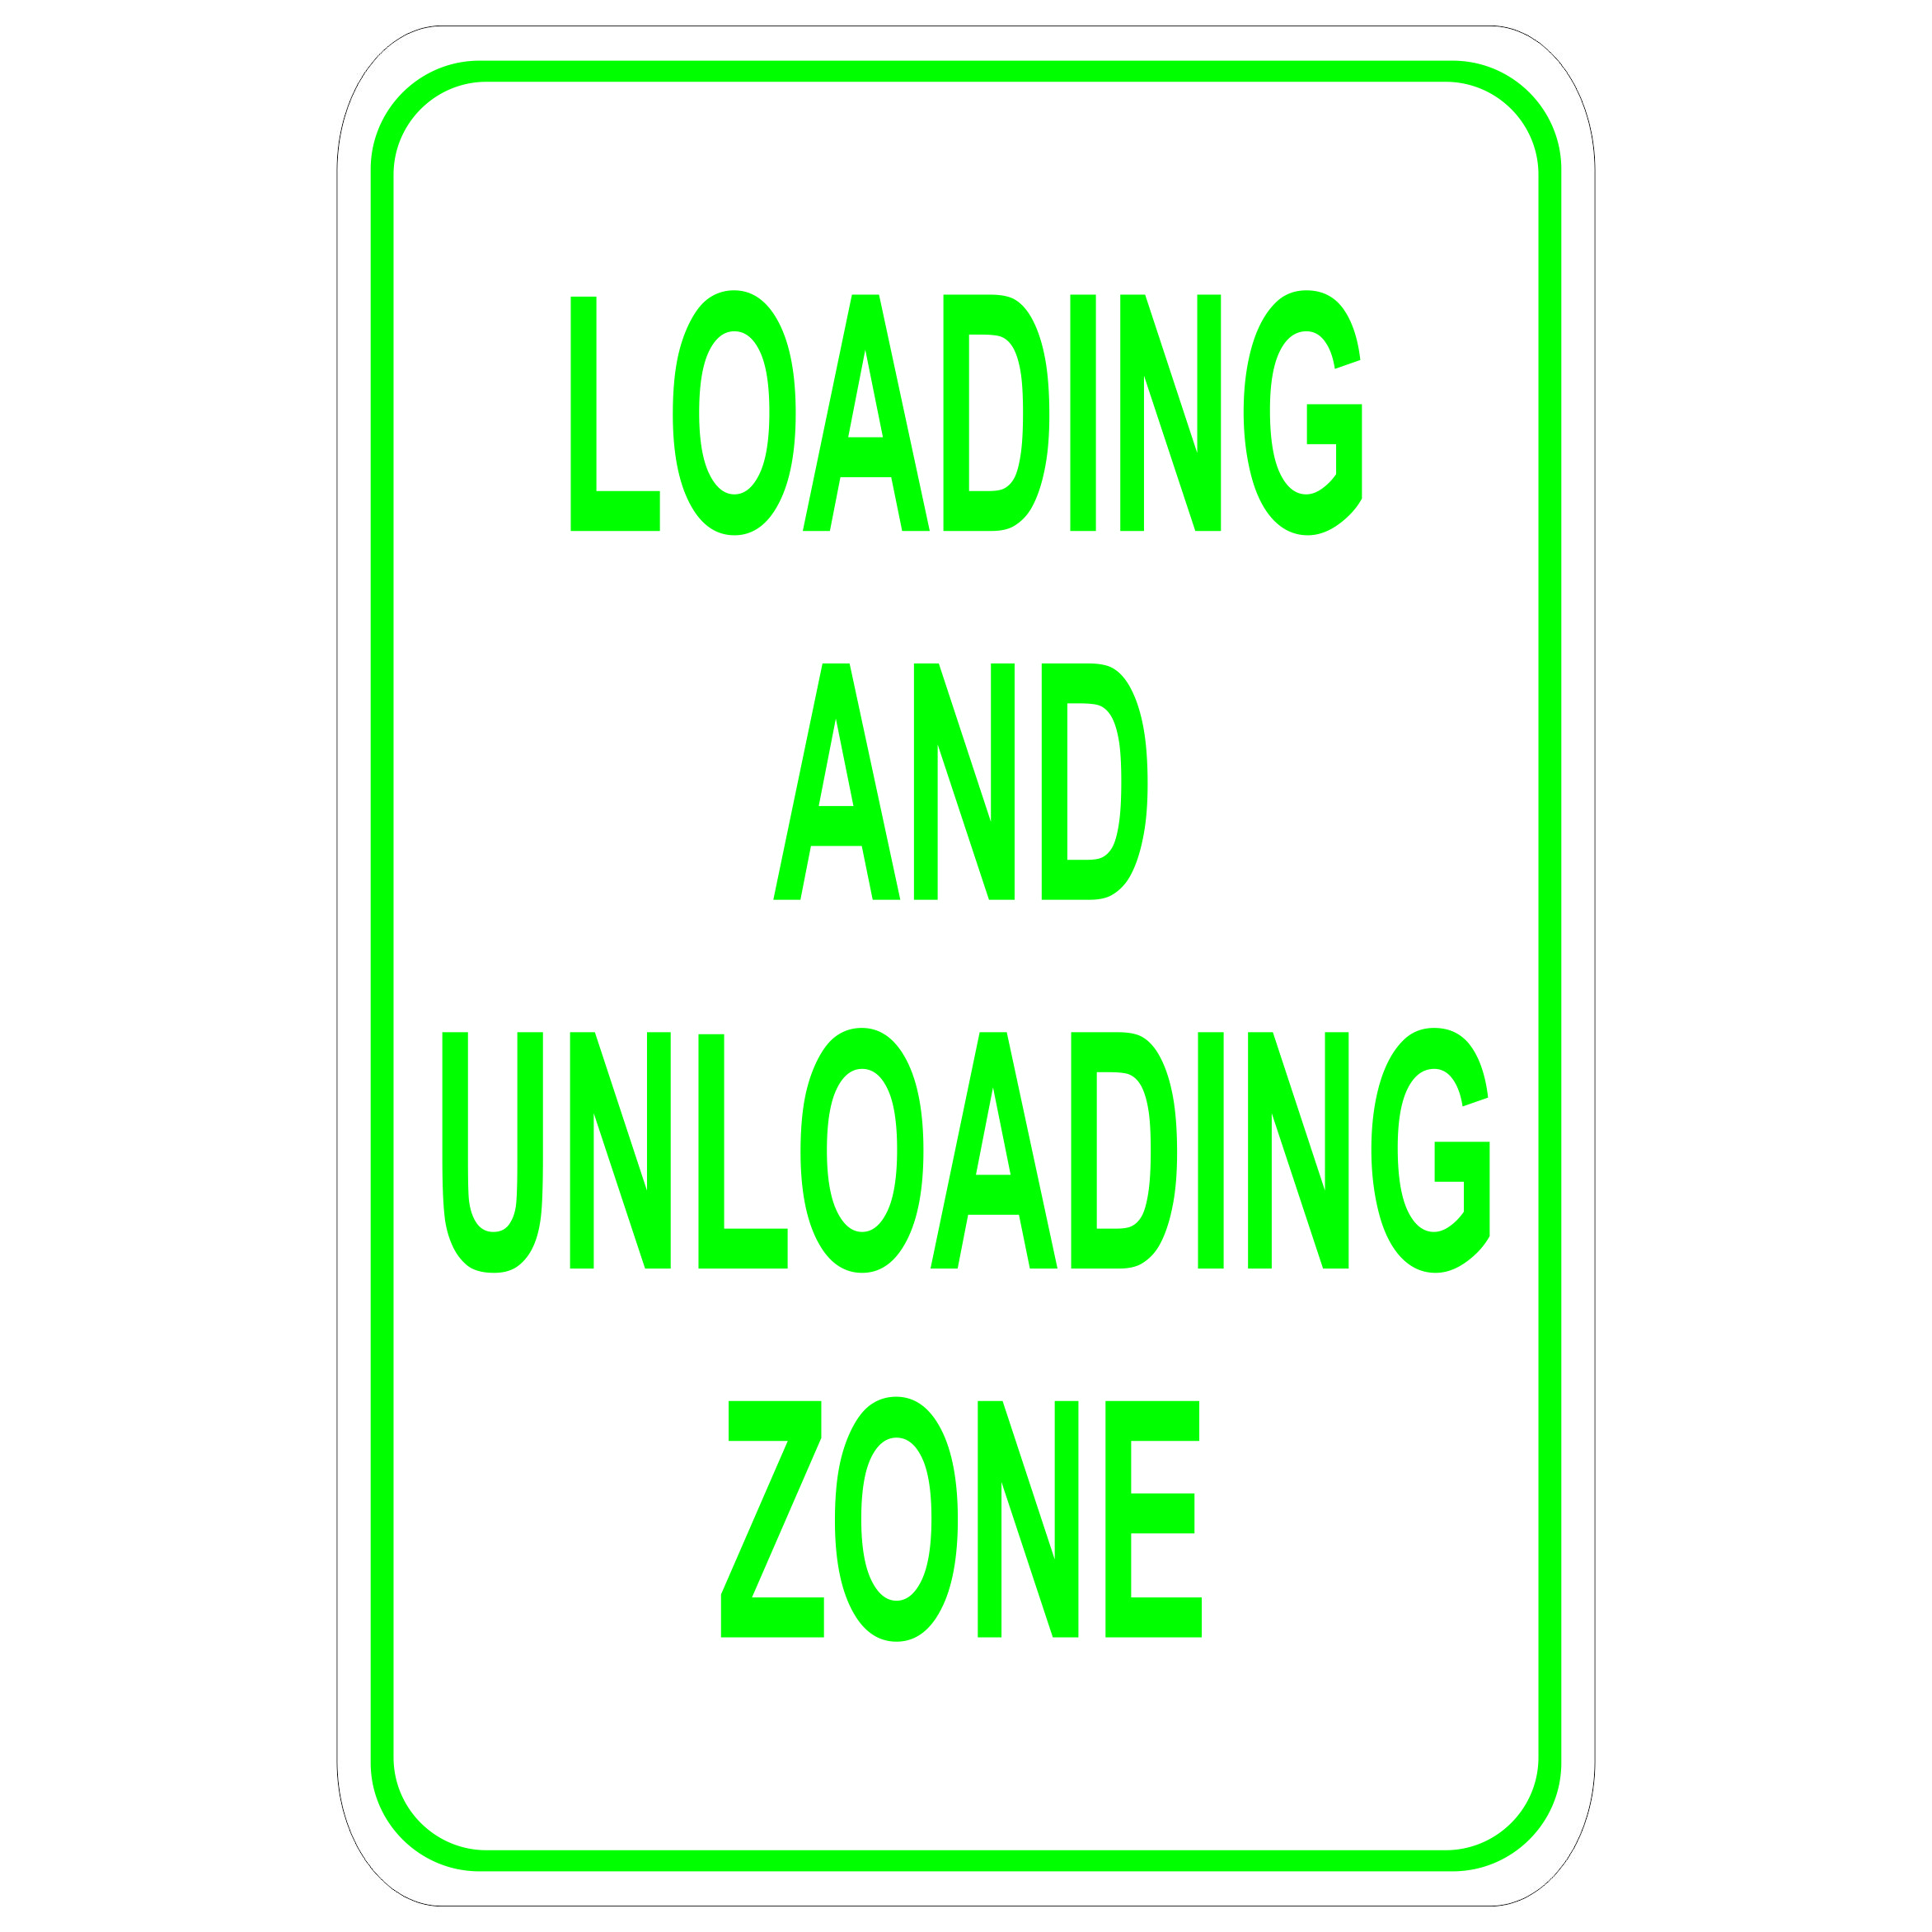 15 Minute Parking Loading And Unloading Zone Parking Sign Aluminum METAL Sign 